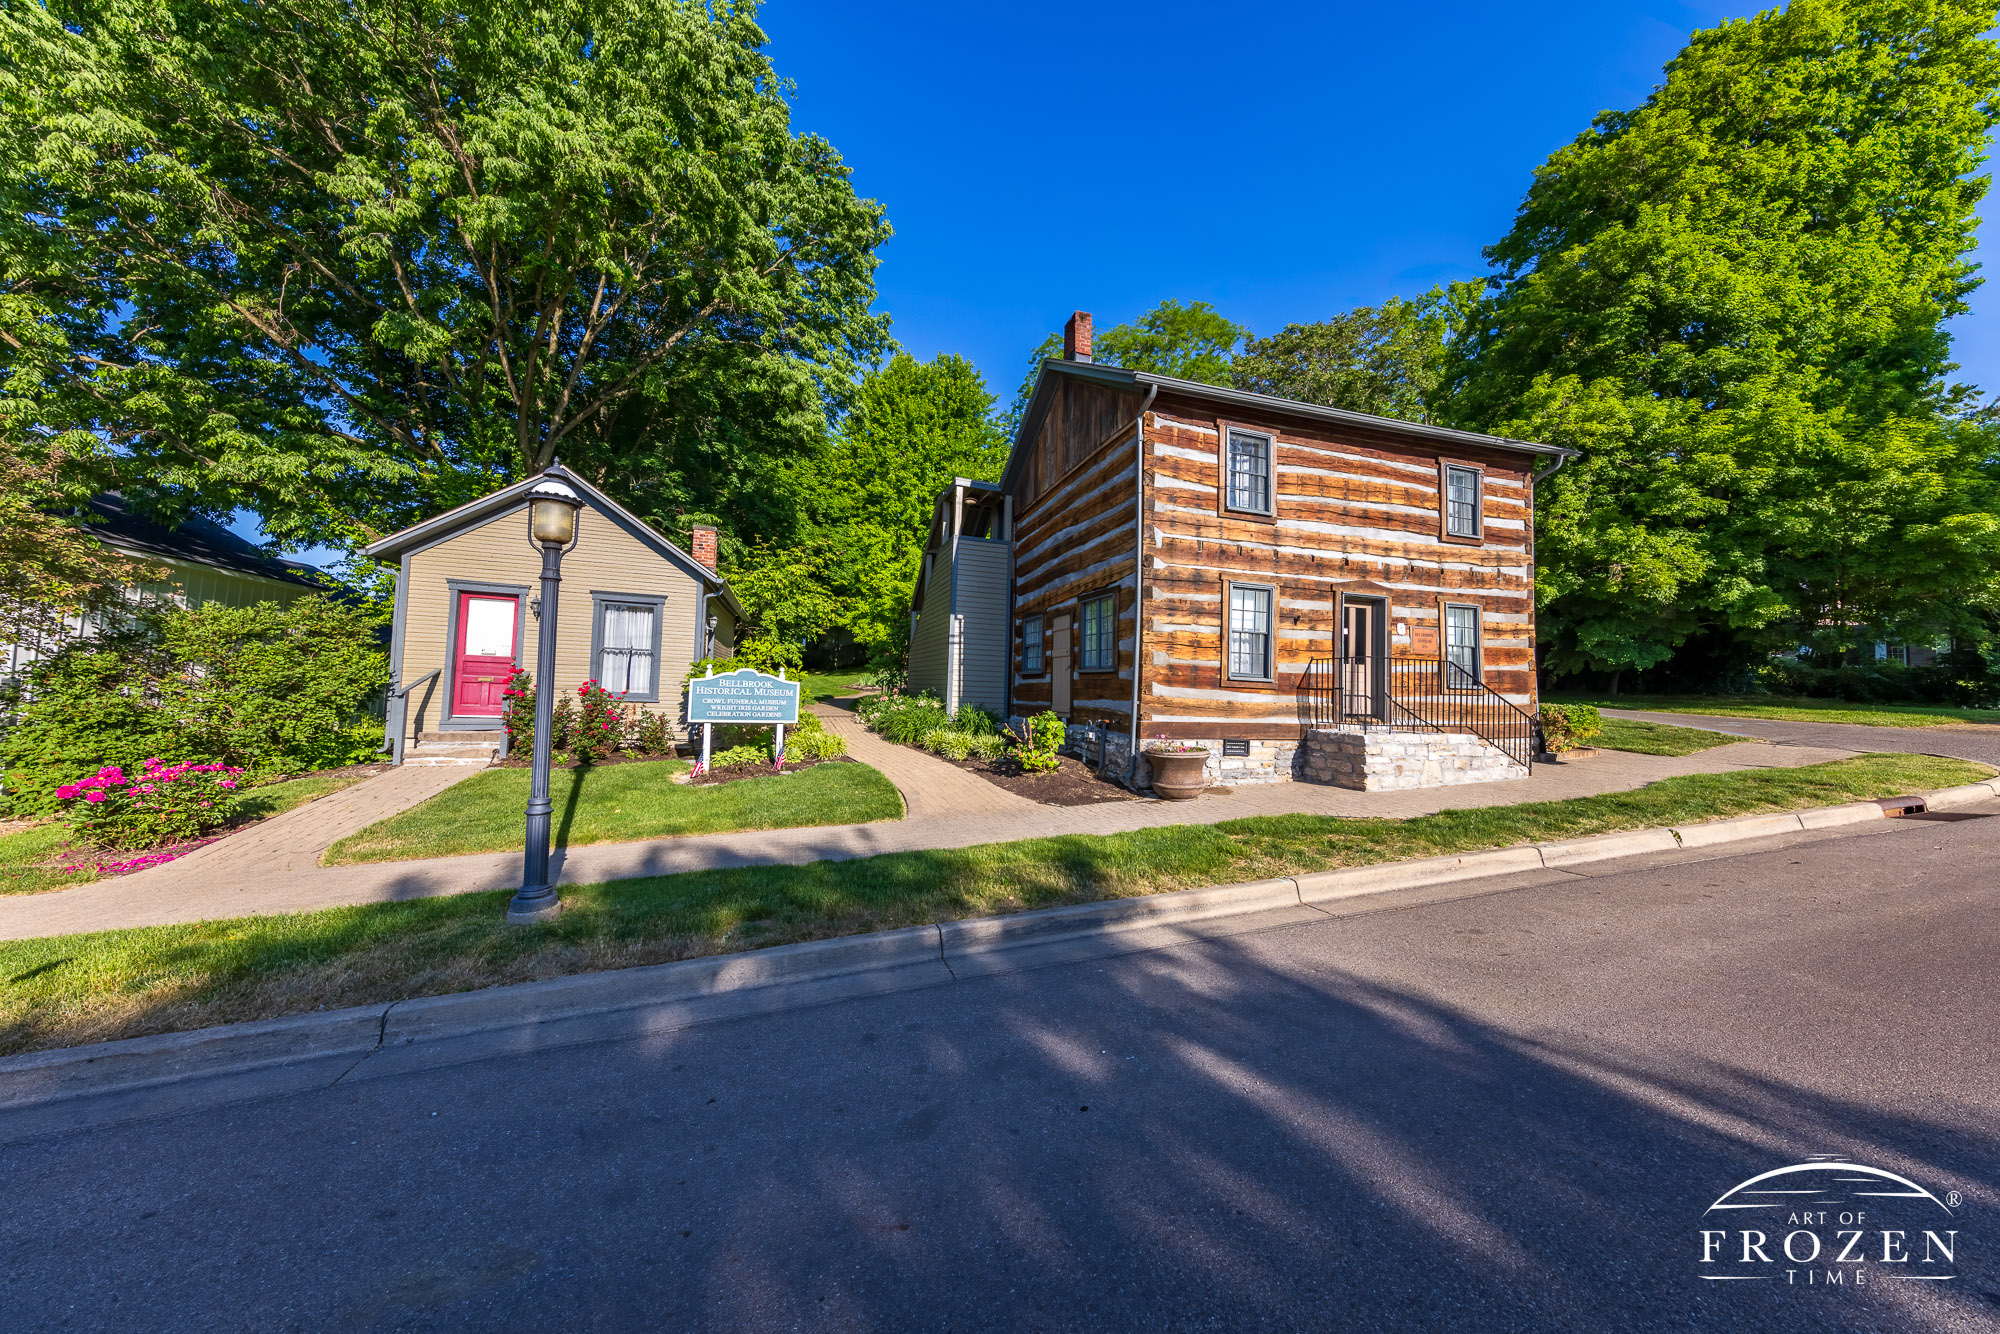 A Greene County historical structure where a refurbished log home stands in Bellbrook, Ohio under blue skies.